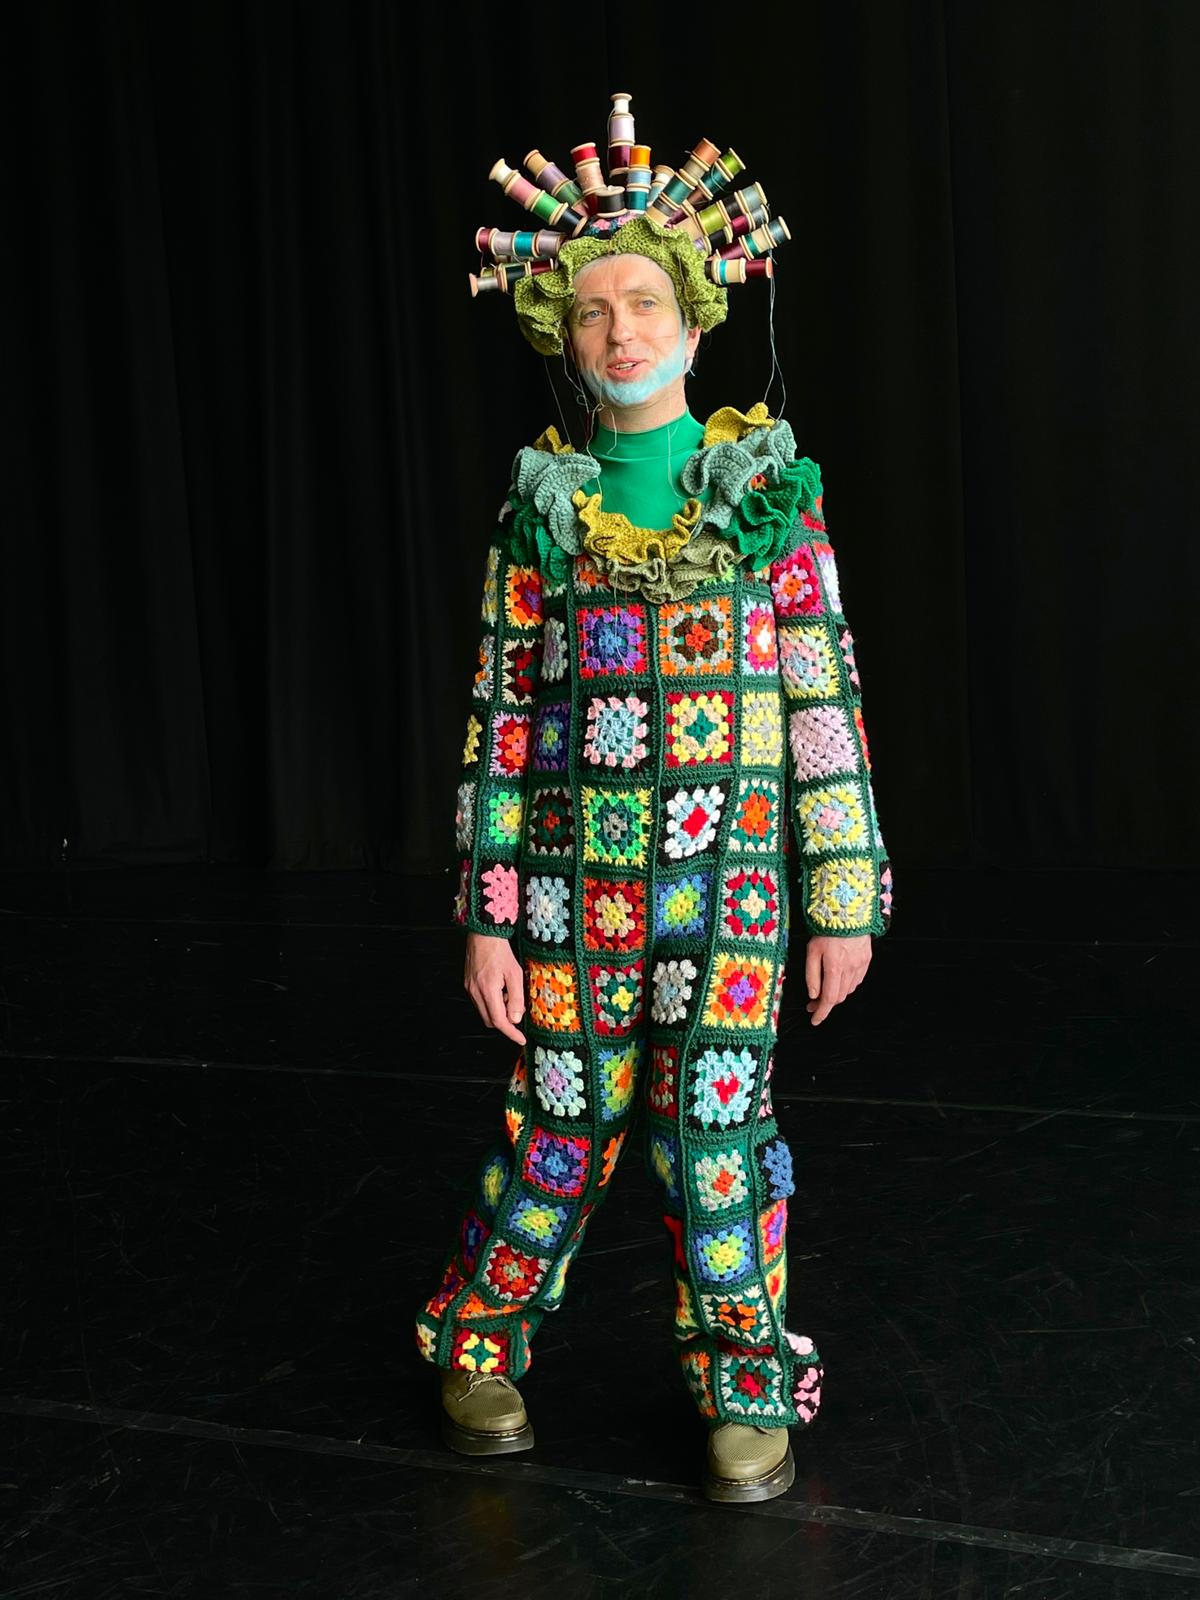 a man in a colorful crocheted outfit is standing on a stage .